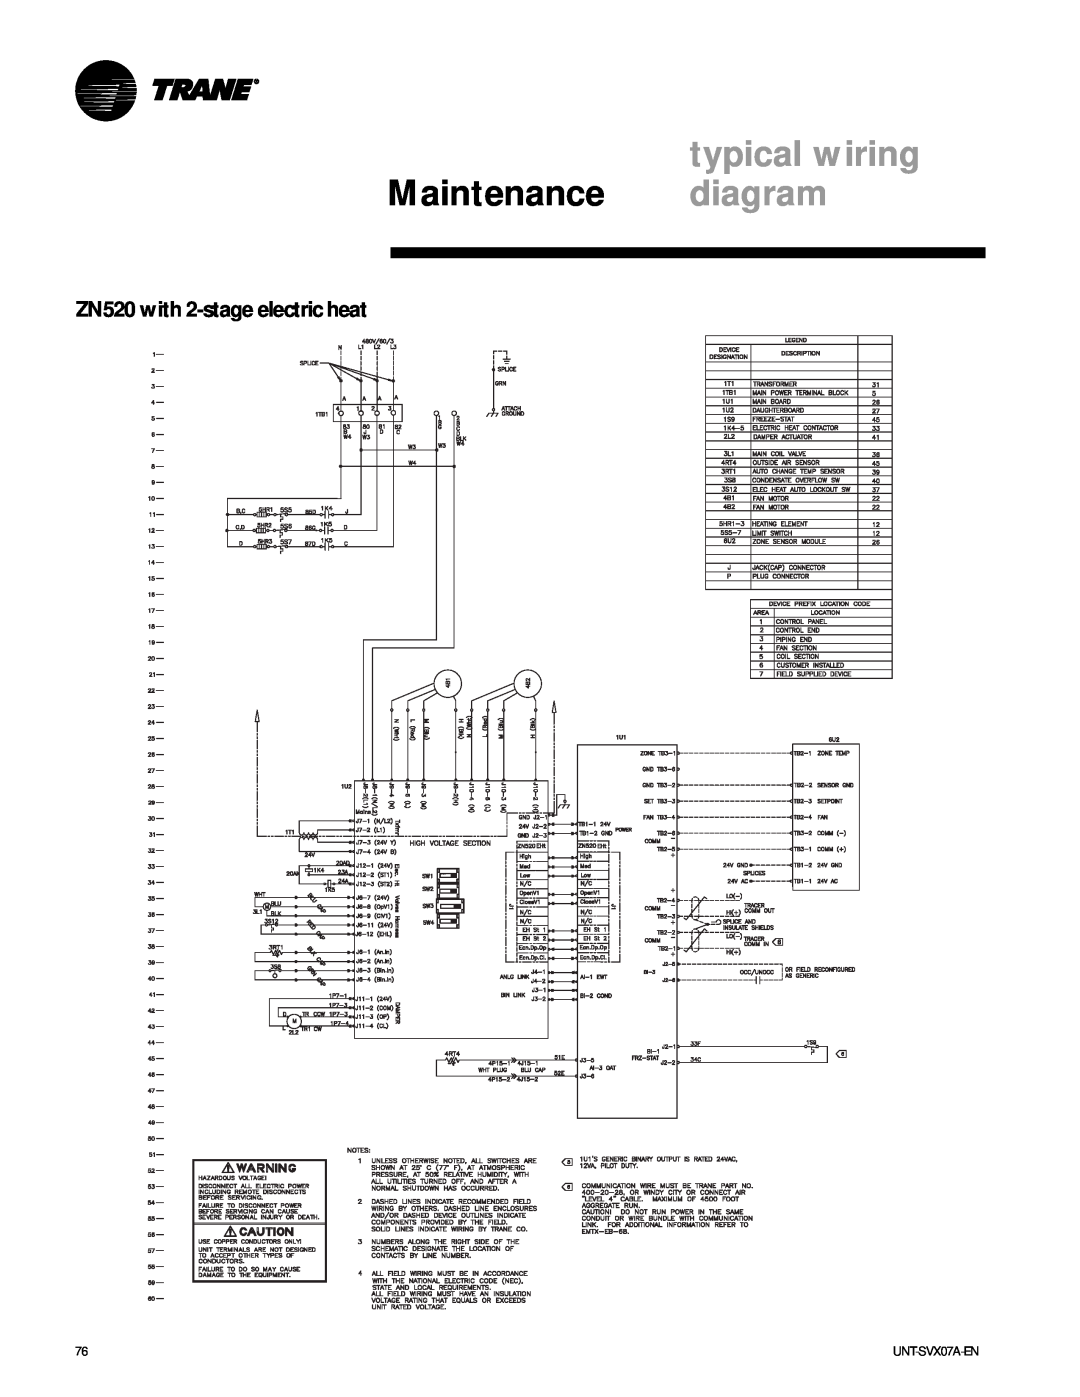 Trane UNT-SVX07A-EN manual ZN520 with 2-stage electric heat, typical wiring, Maintenance diagram 